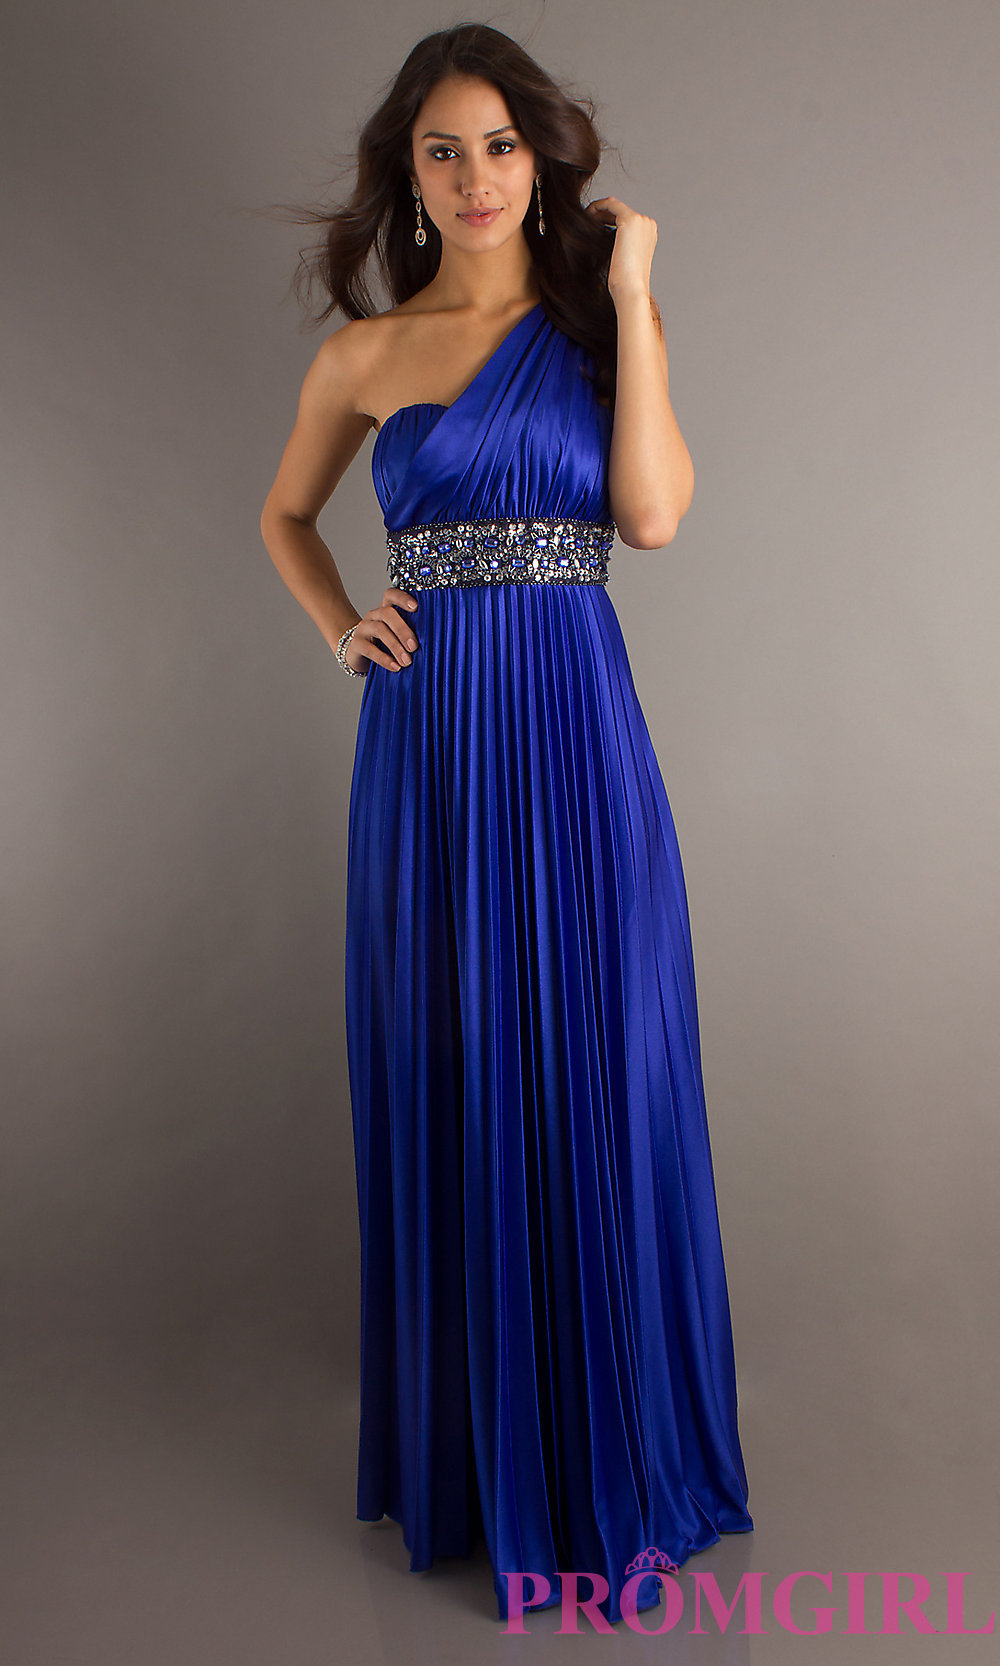 Black And Blue Formal Dress : Make Your Evening Special